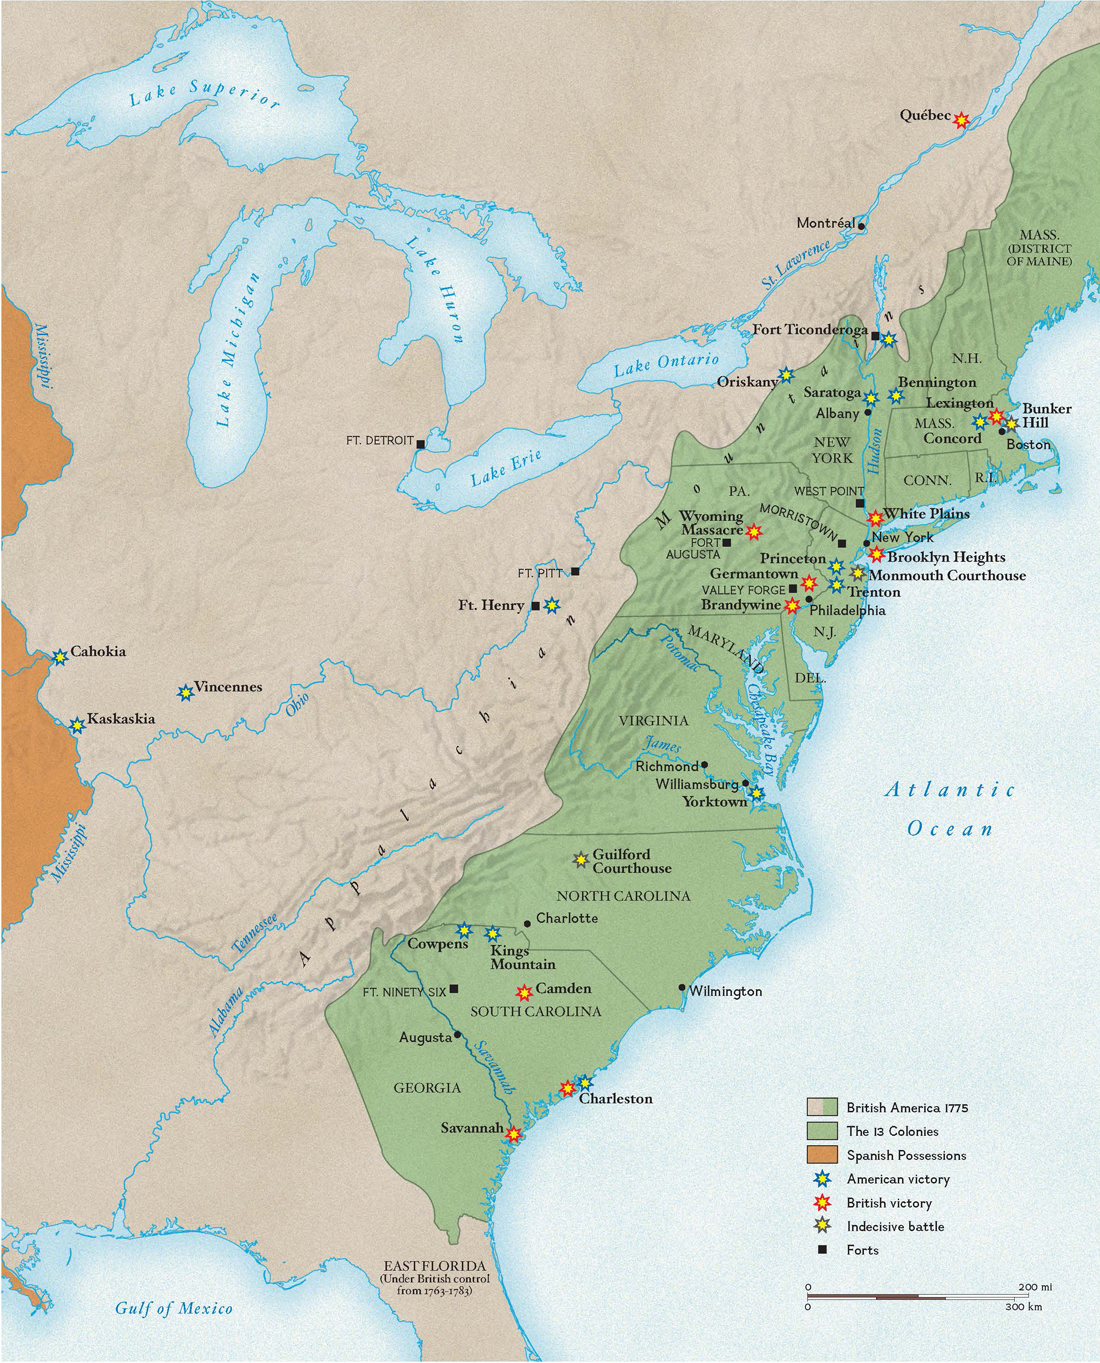 13 Colonies Map With Colonial Cities